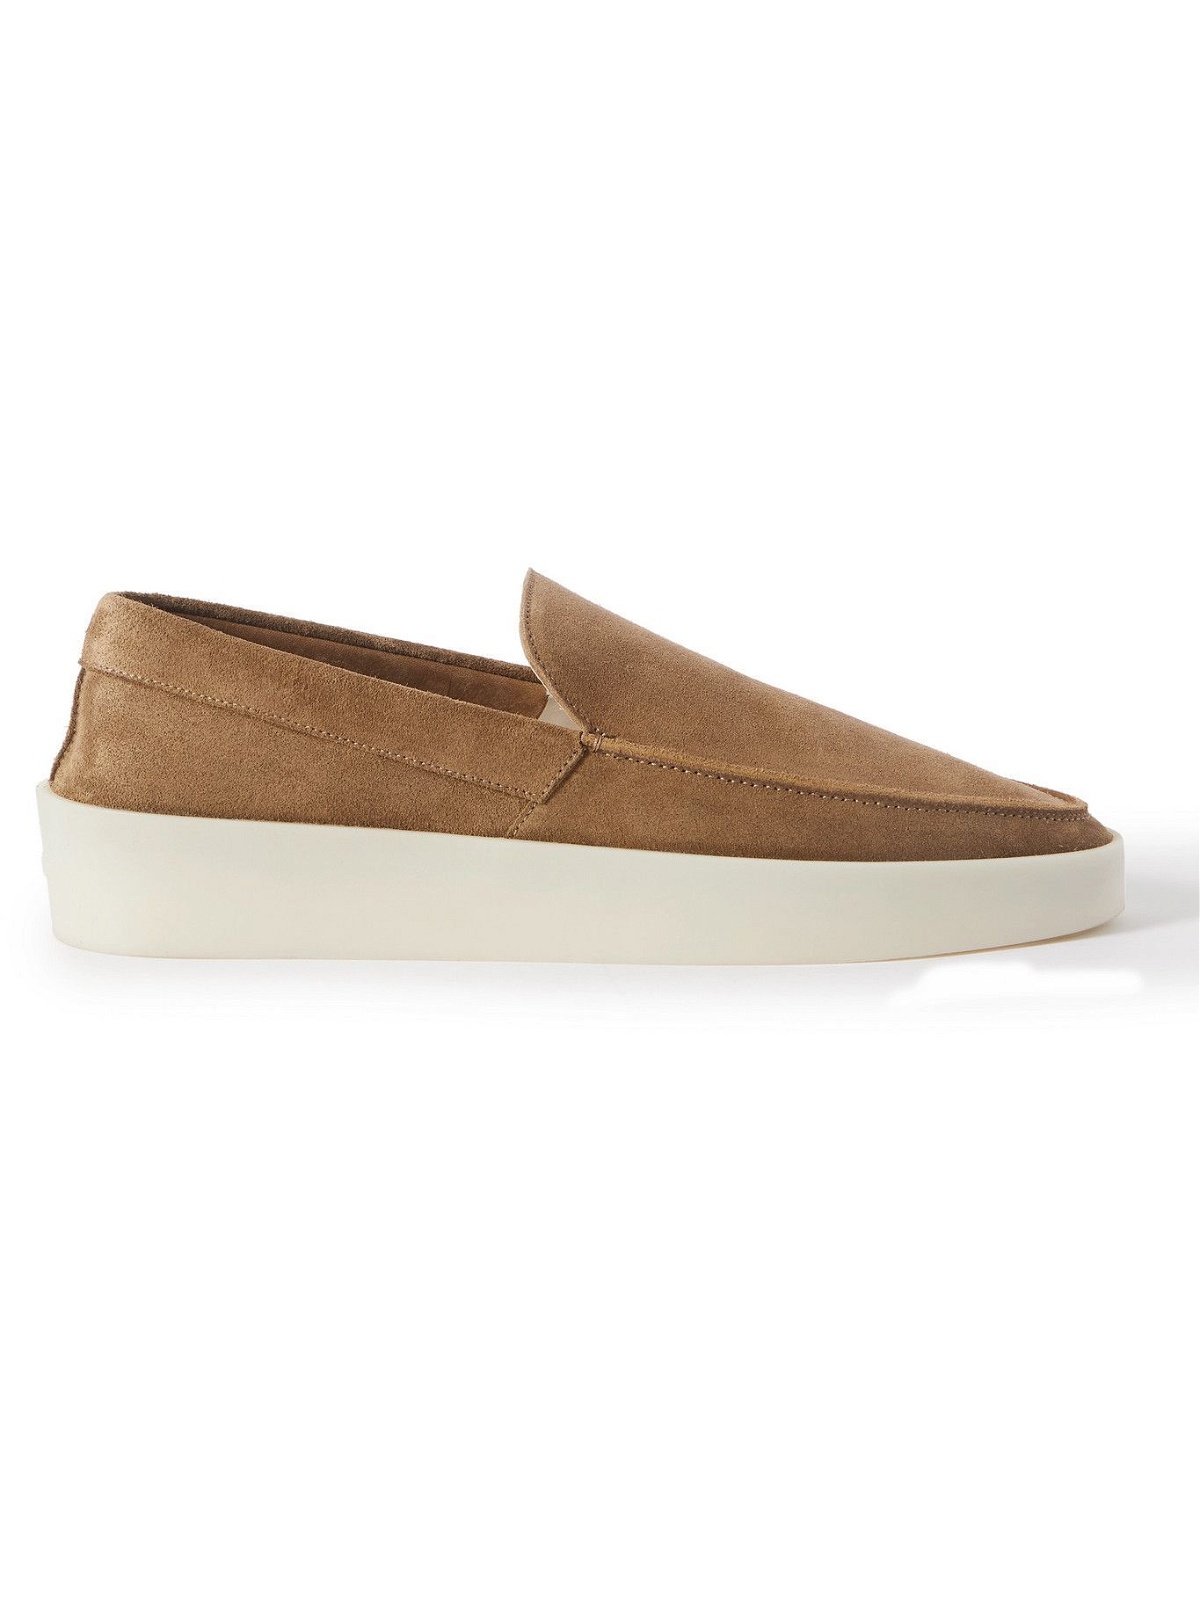 FEAR OF GOD - Reverse Suede Loafers - Brown Fear Of God